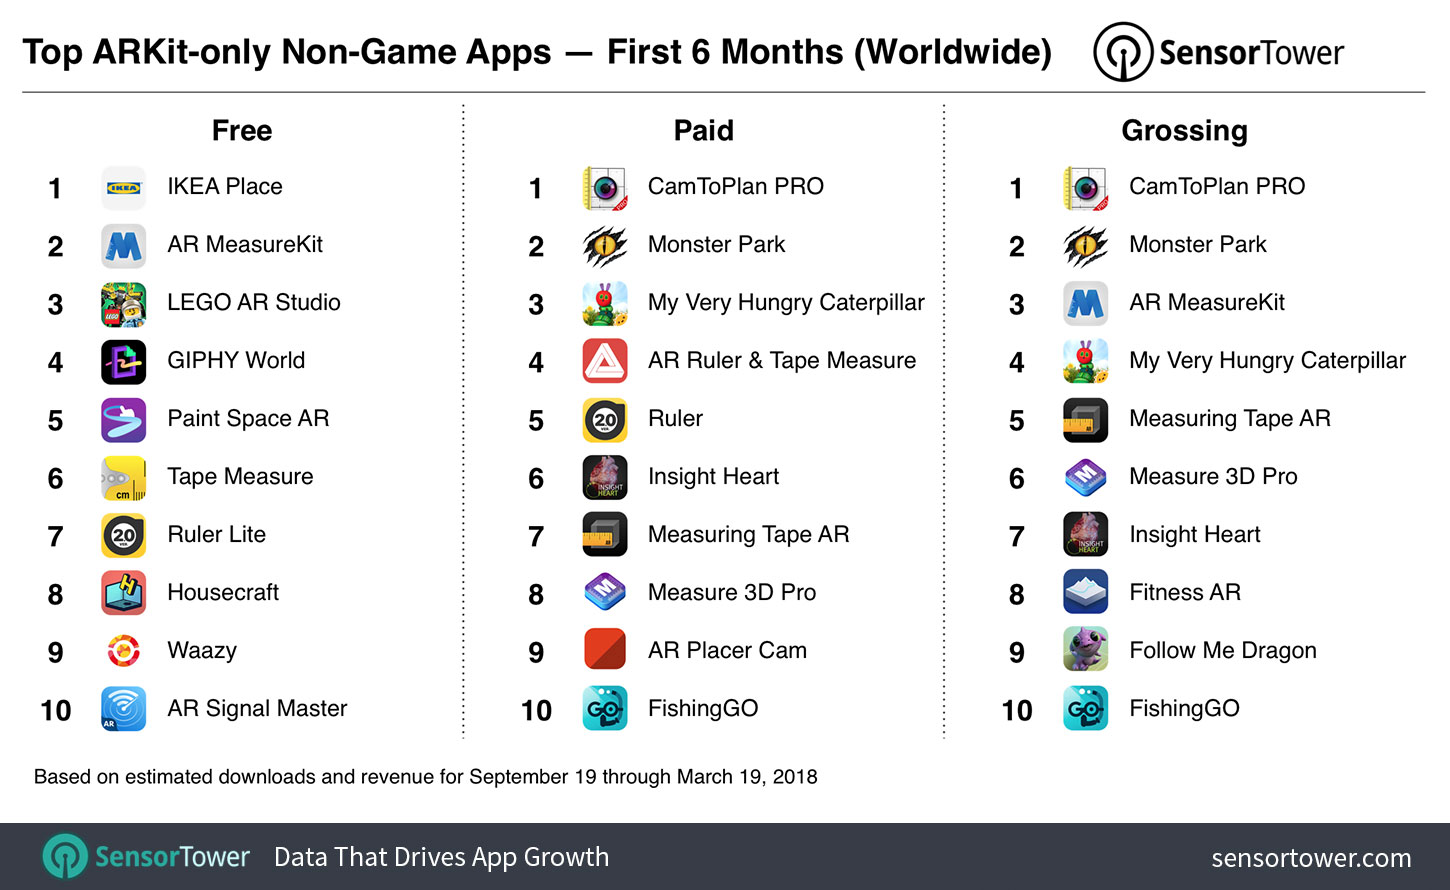 Ranking of top free, paid, and grossing ARKit non-game apps overall for September 19, 2017 to March 19, 2018